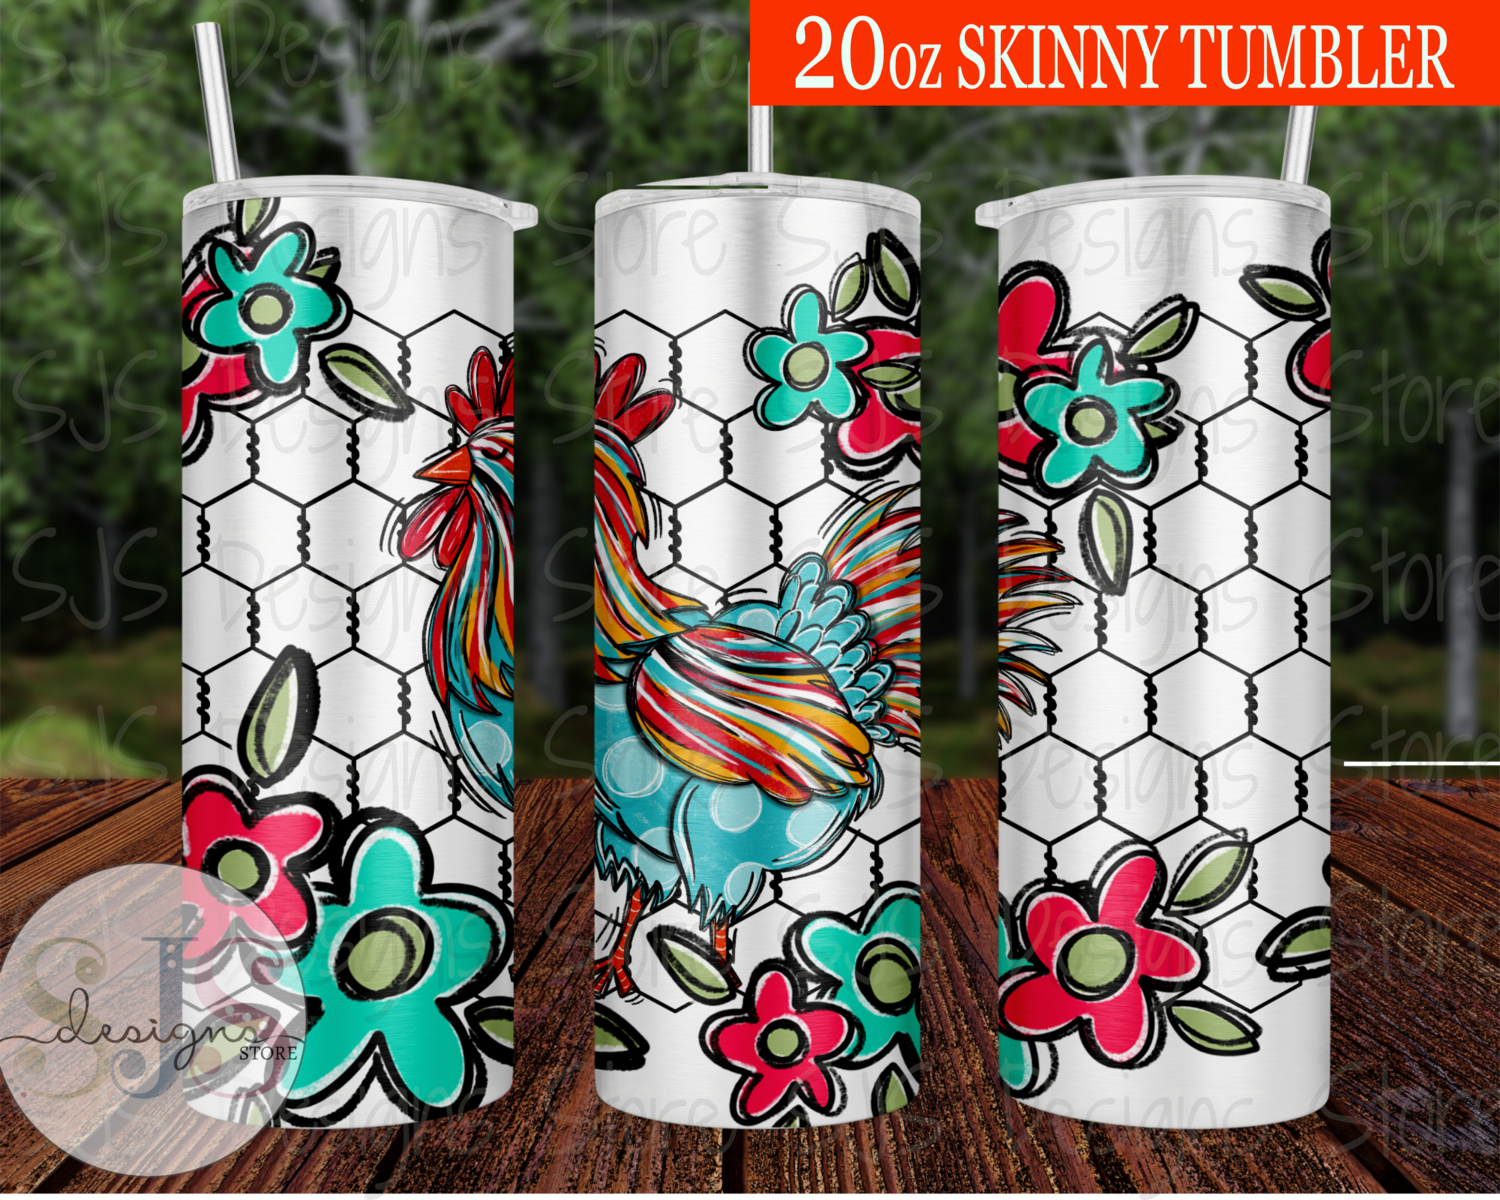 Chickens & Flowers 20oz Tumbler